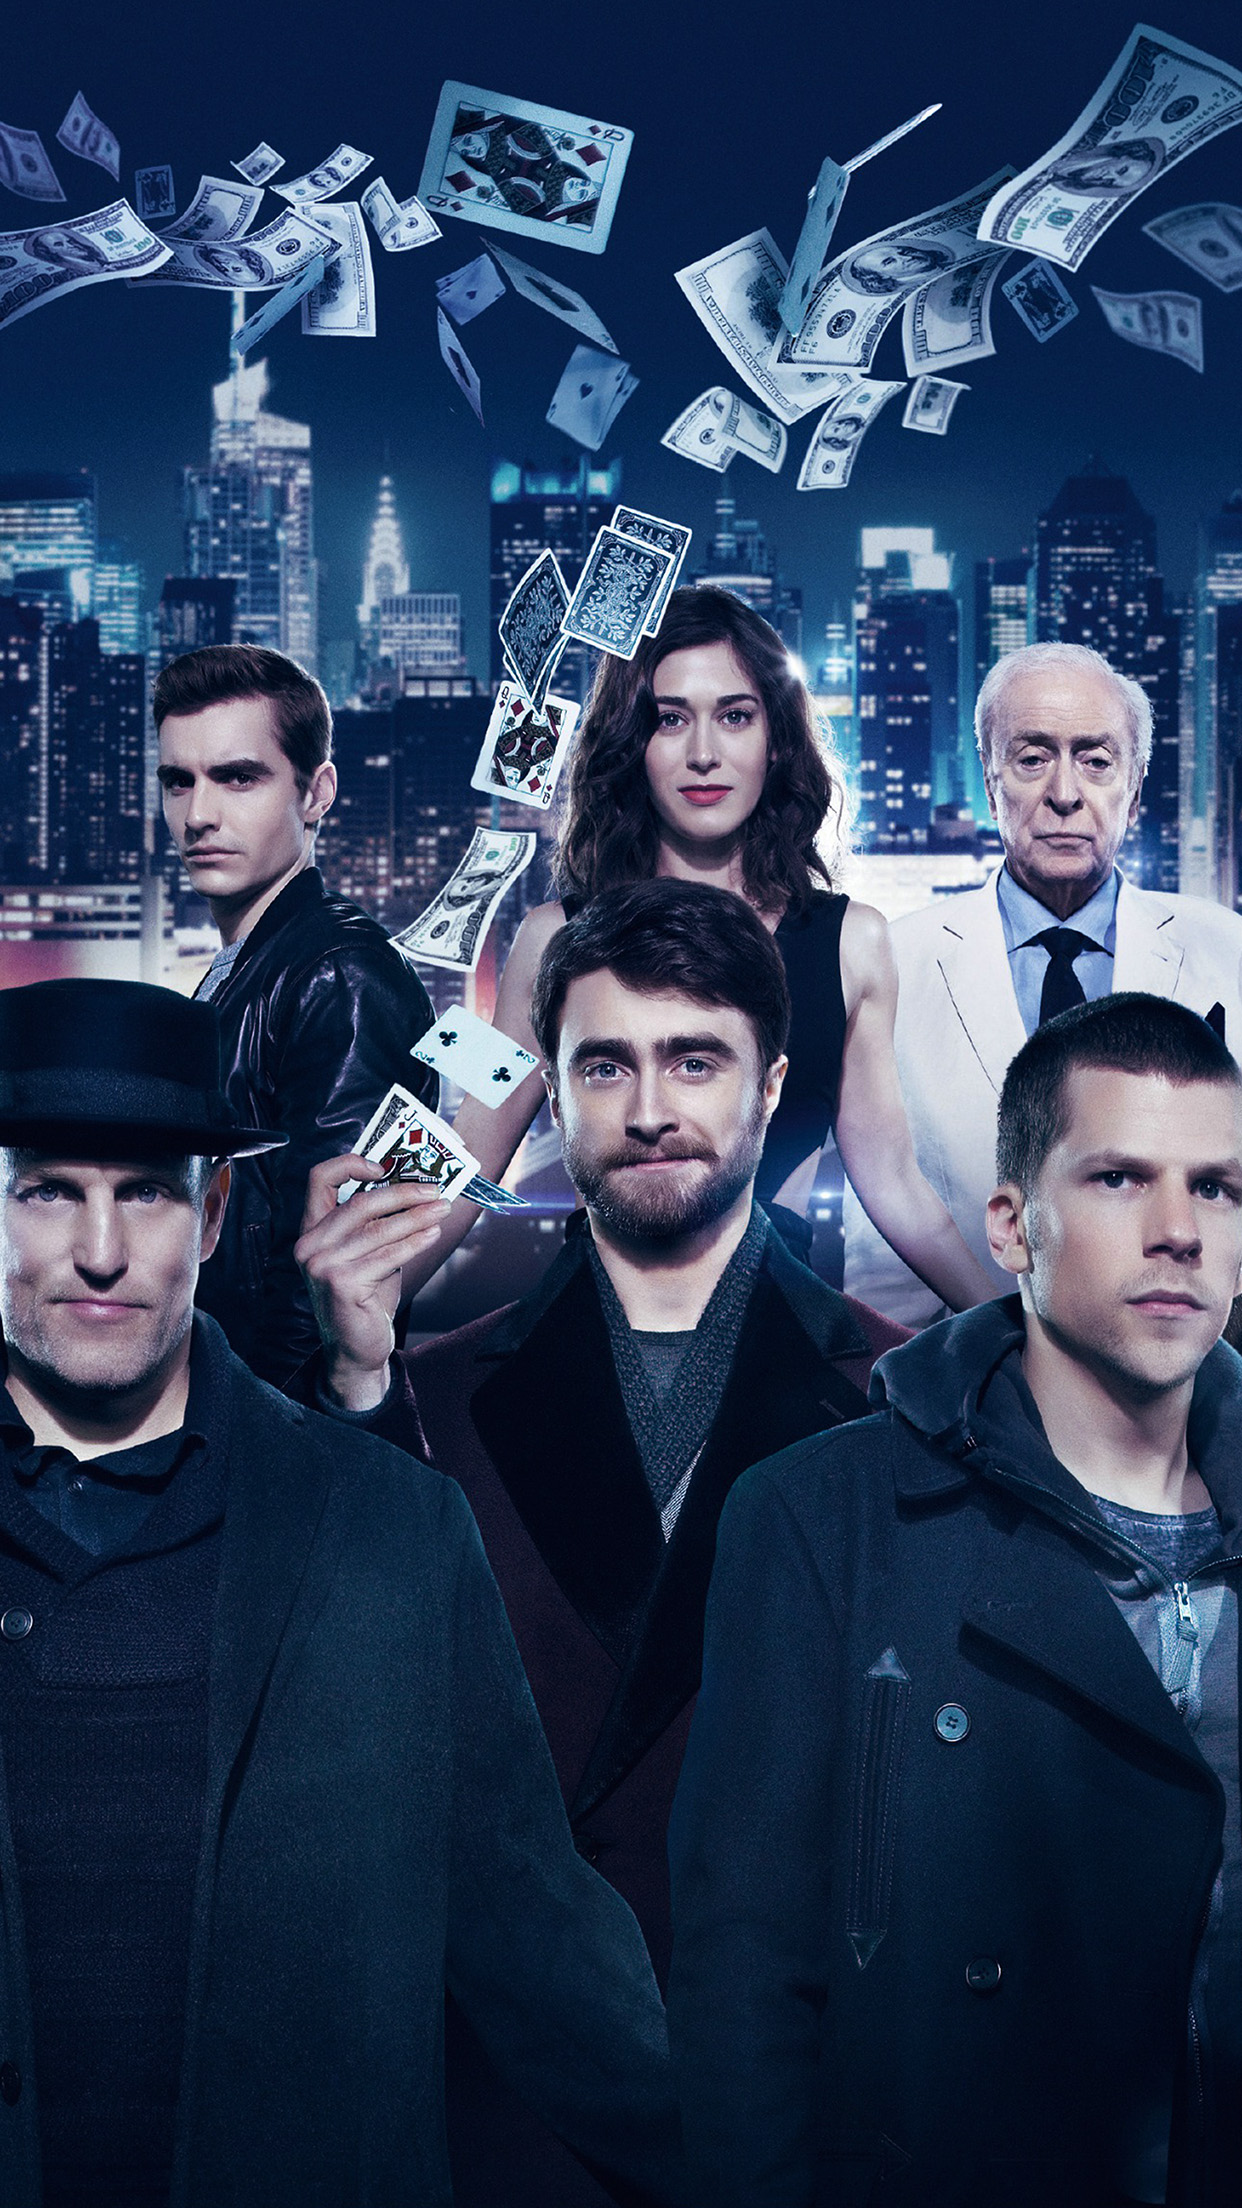 Now You See Me Poster Film Art Illustration Android wallpaper